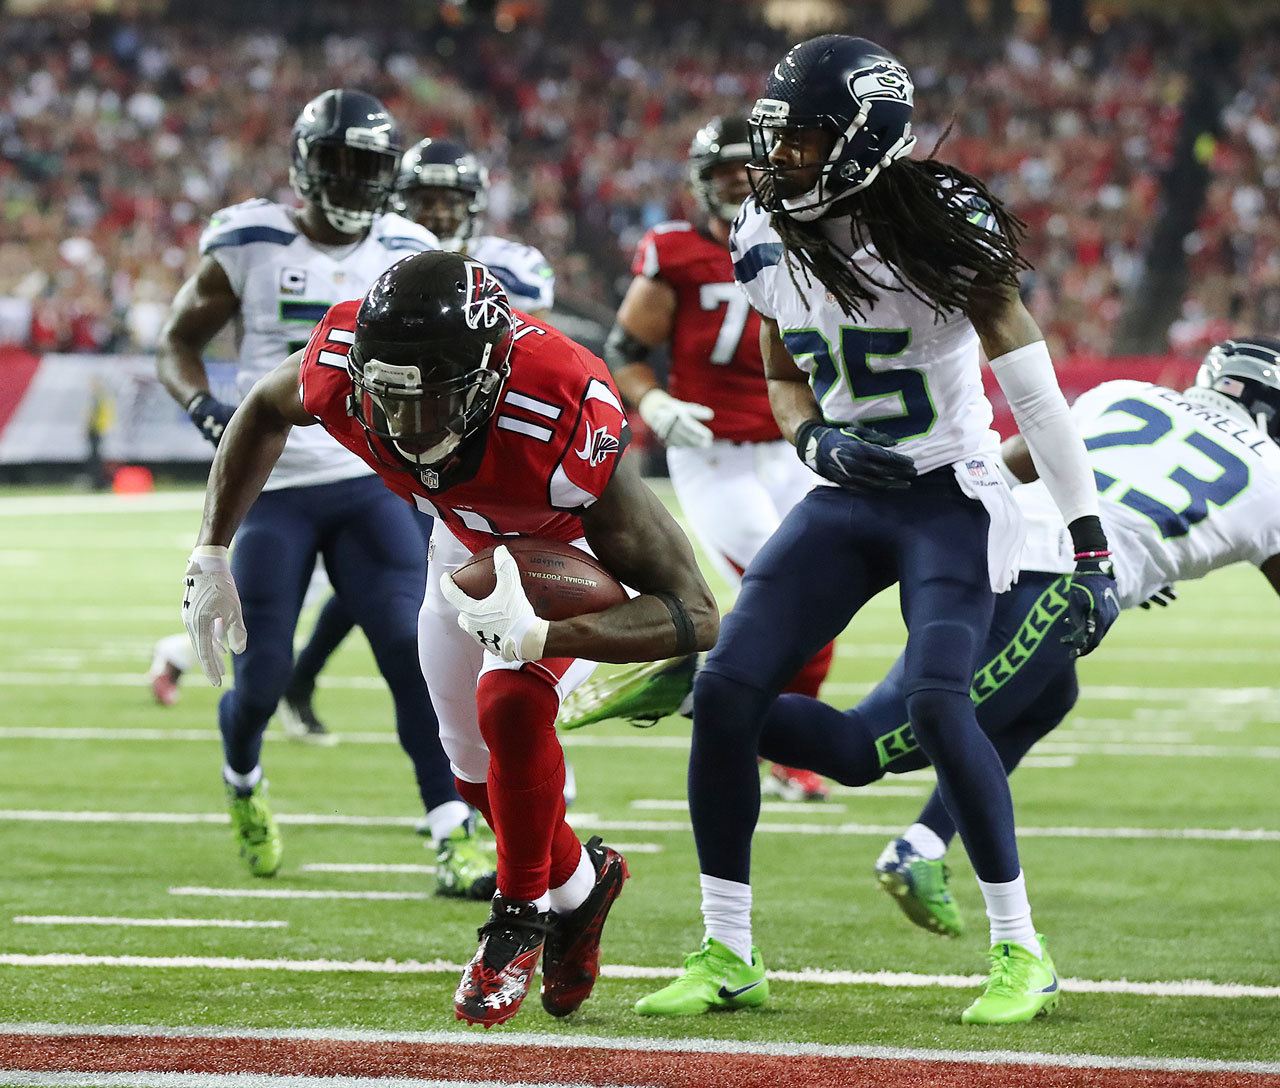 (Curtis Compton/Atlanta Journal-Constitution) Seattle’s Richard Sherman, seen here during last Saturday’s NFC Divisional Playoff game in Atlanta, apparently had a knee injury for the second half of the season. The NFL is investigating the Seahawks about whether the team intentionally hid the injury from the injury reports.